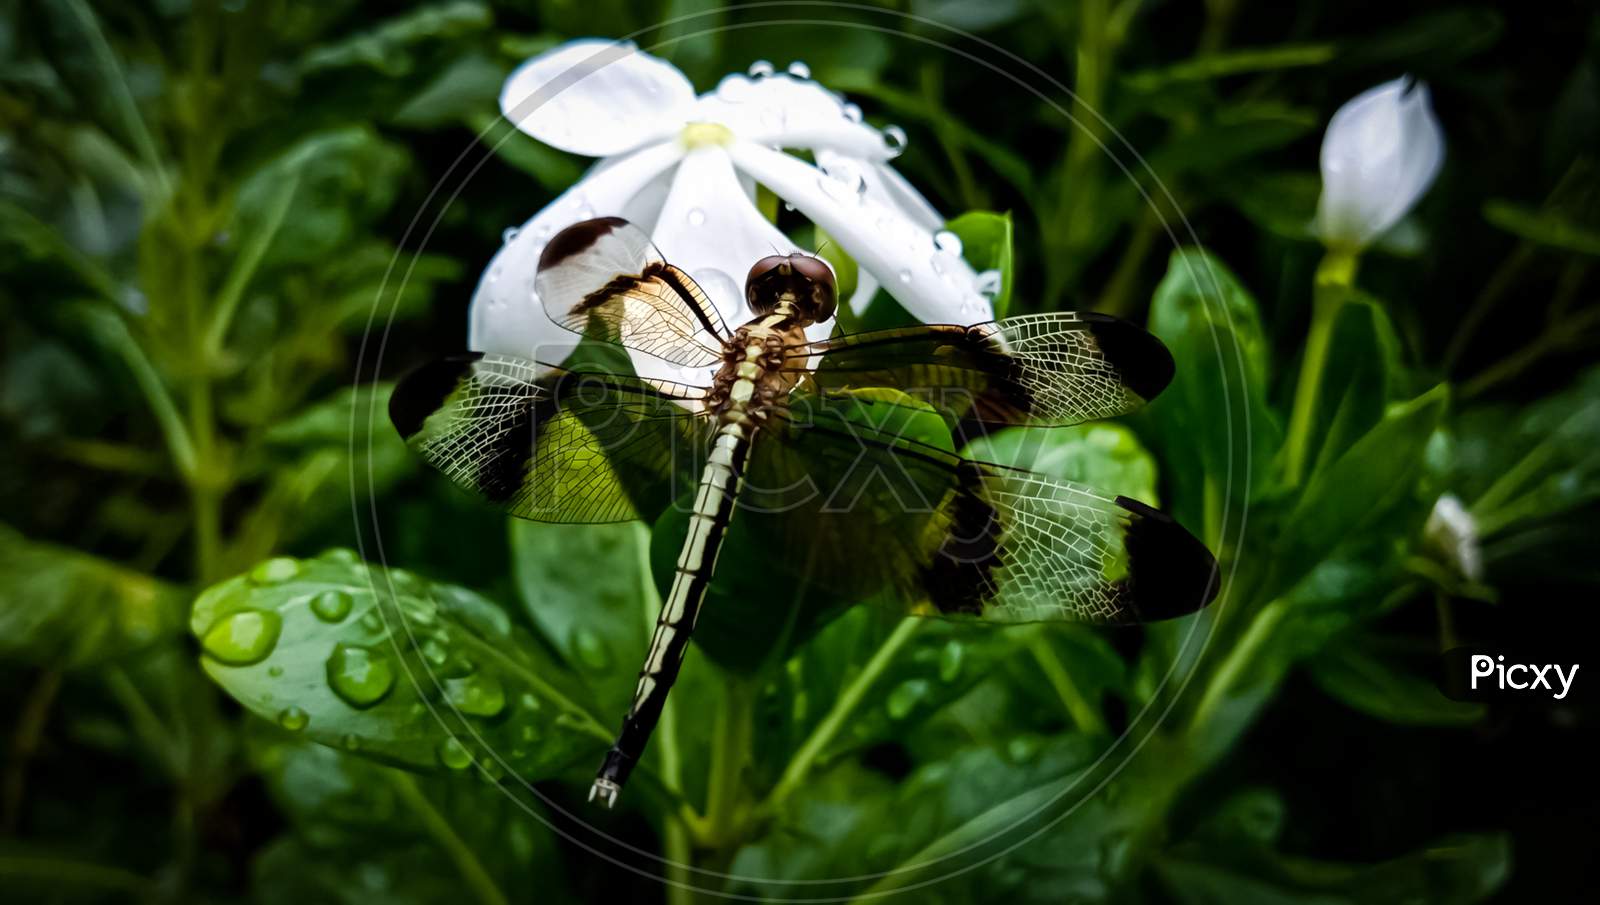 A White Madagascar Periwinkle (Nayantara) Flower And A Dragon Fly On It.